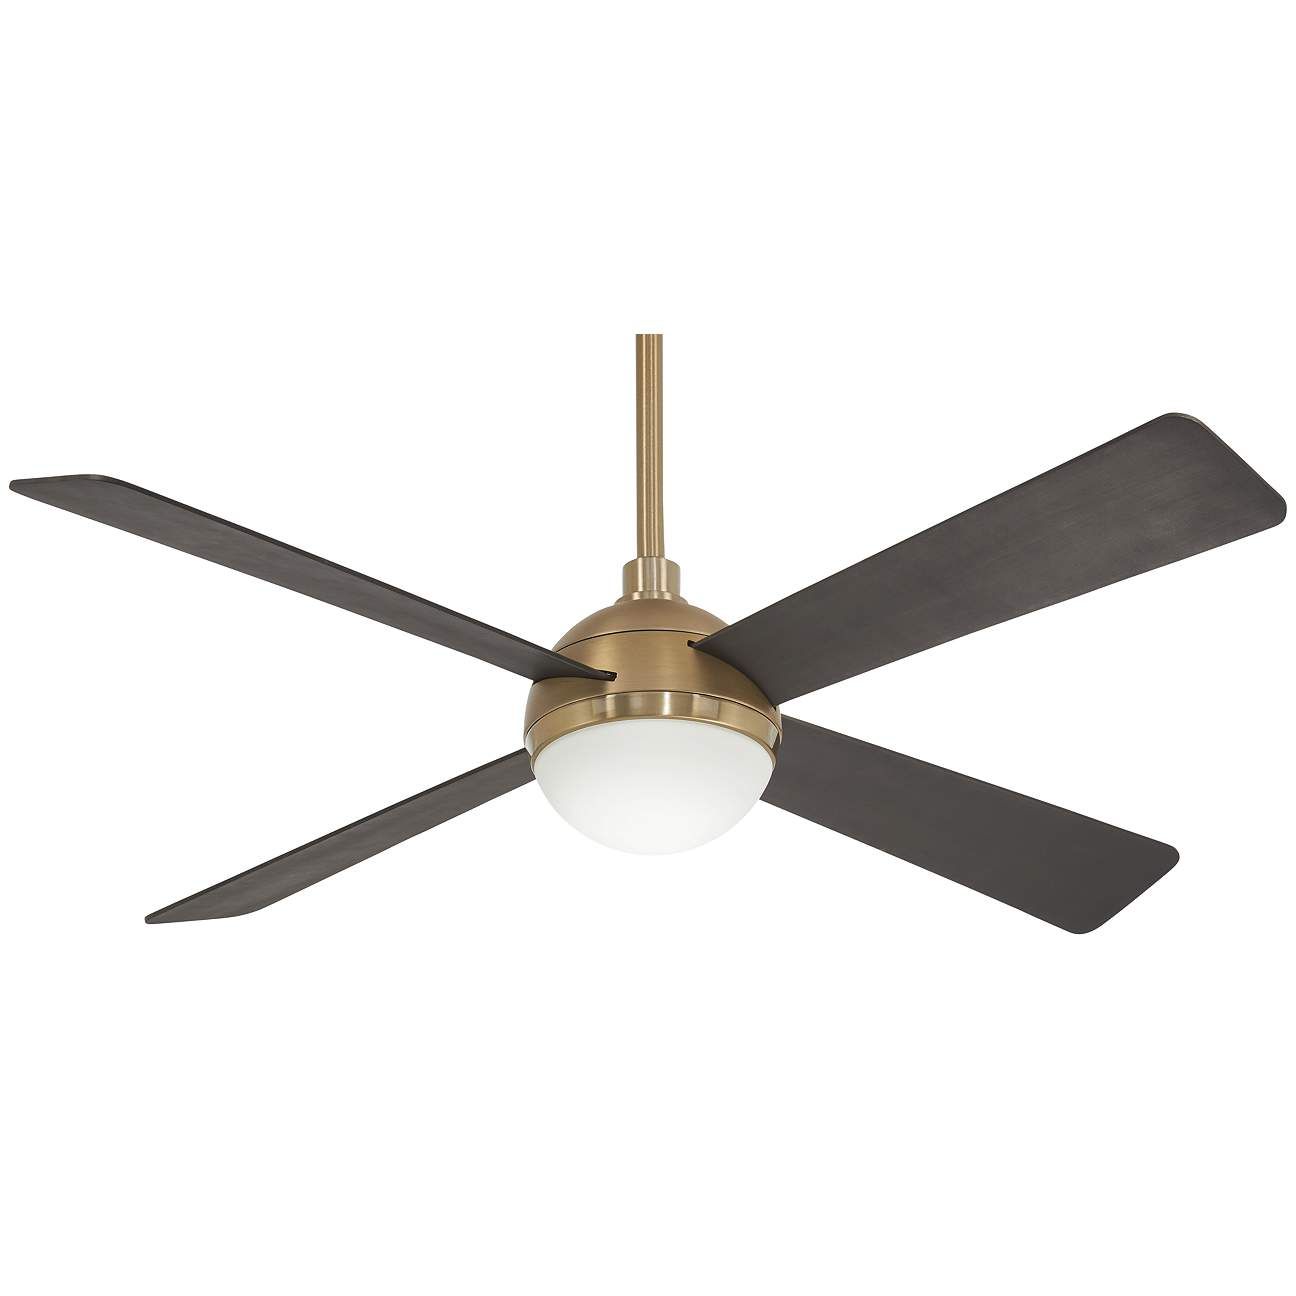 54" Minka Aire Orb Brushed Brass LED Ceiling Fan with Remote Control | Lamps Plus